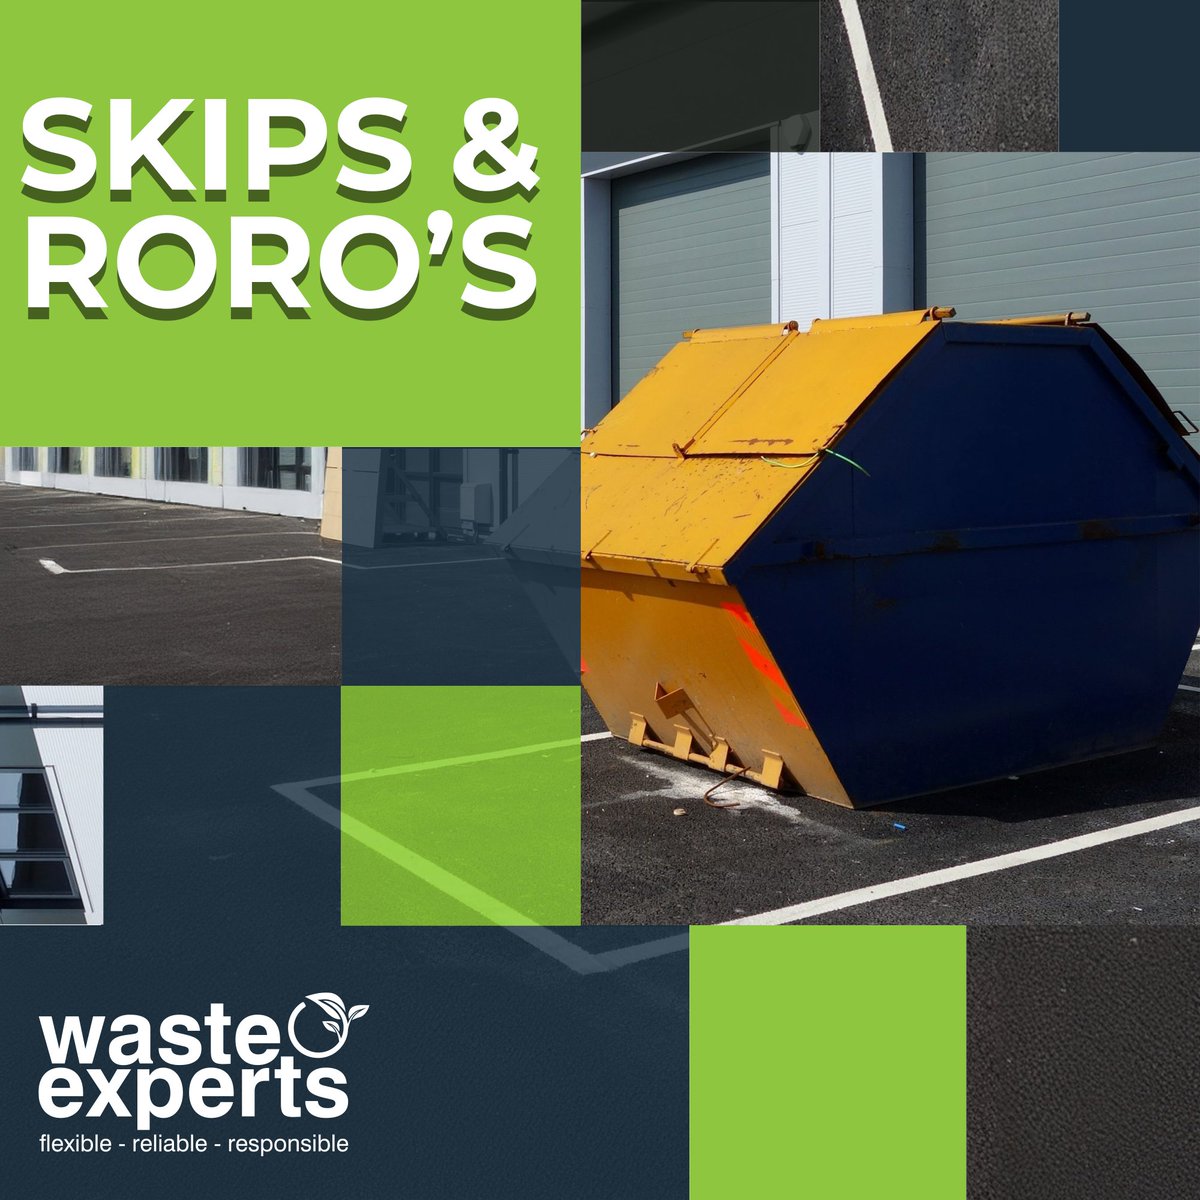 At Waste Experts, we focus on sustainability! ♻️ Manage waste efficiently and reduce impact with our skips and roll-ons. Let's create a cleaner, greener world. #GreenSolutions #WasteExperts